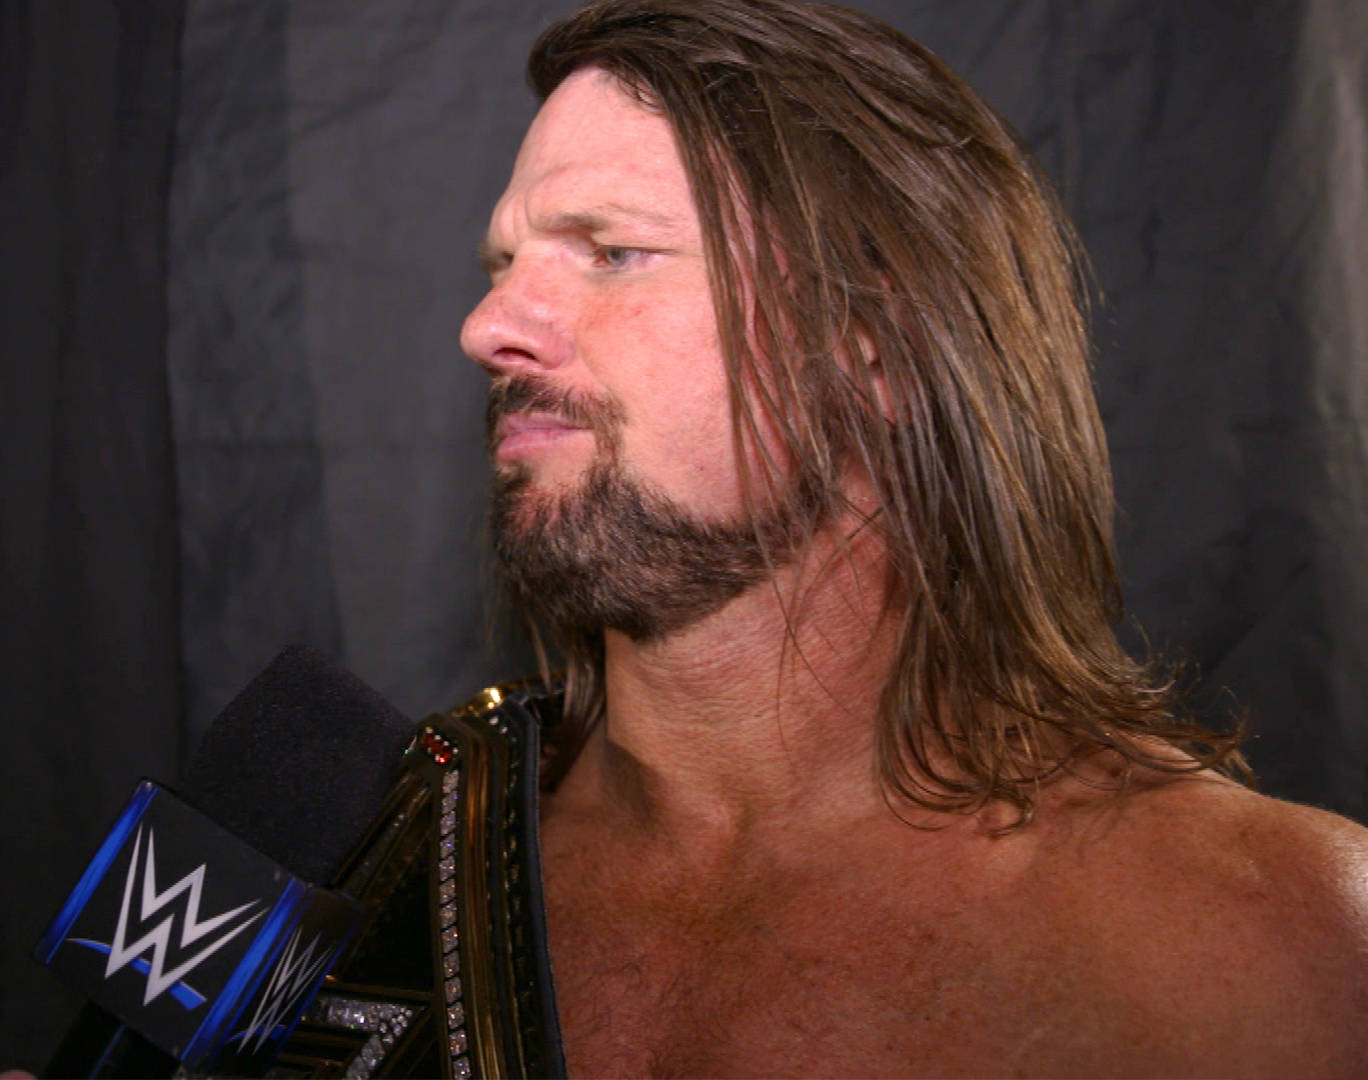 WWE Champion AJ Styles has a blunt warning for Shinsuke Nakamura: WWE.com Exclusive, March 11, 2018